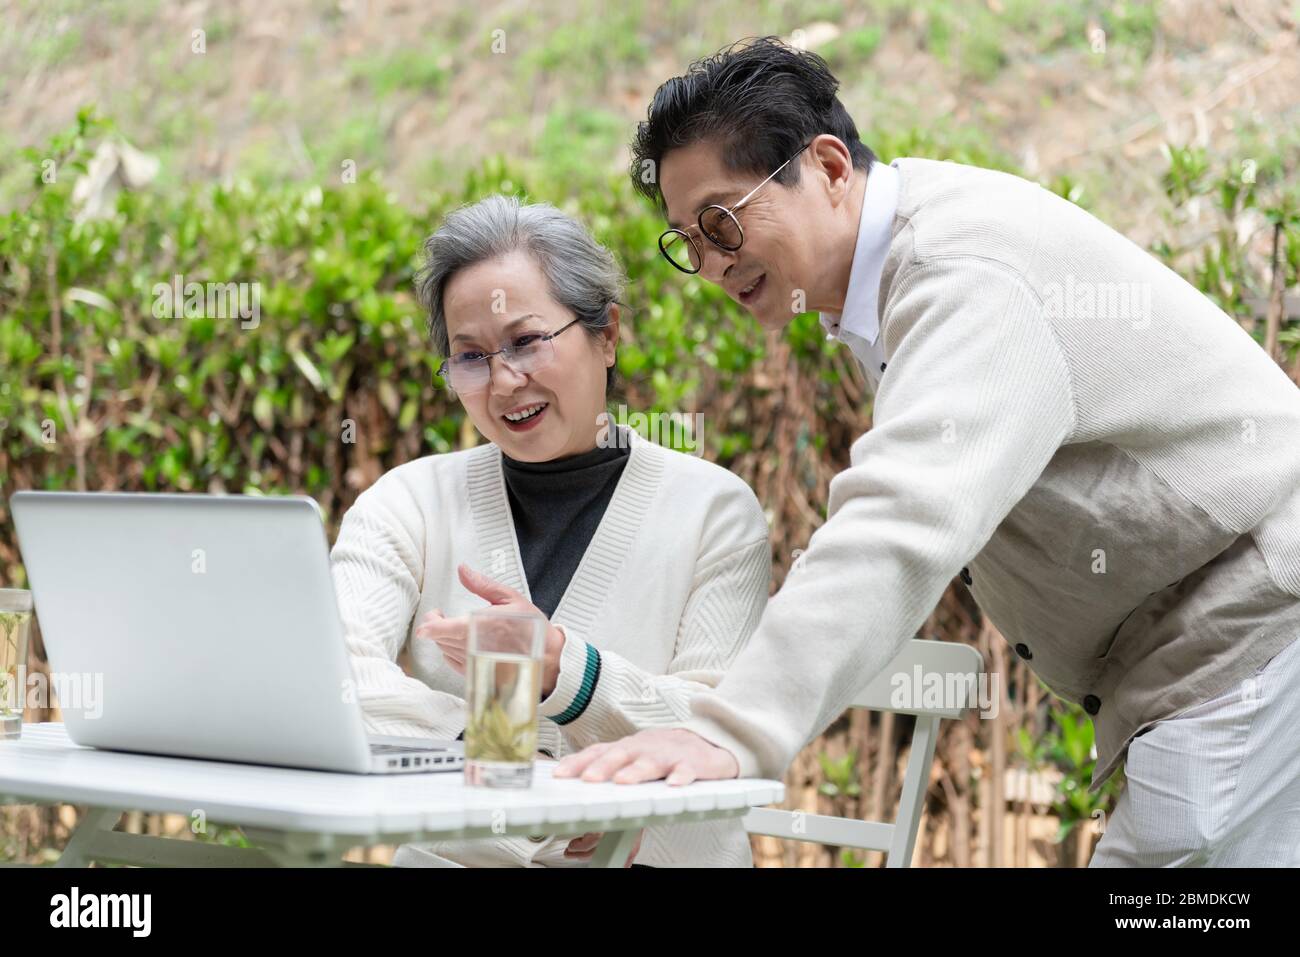 An Asian elderly couple is using a laptop Stock Photo